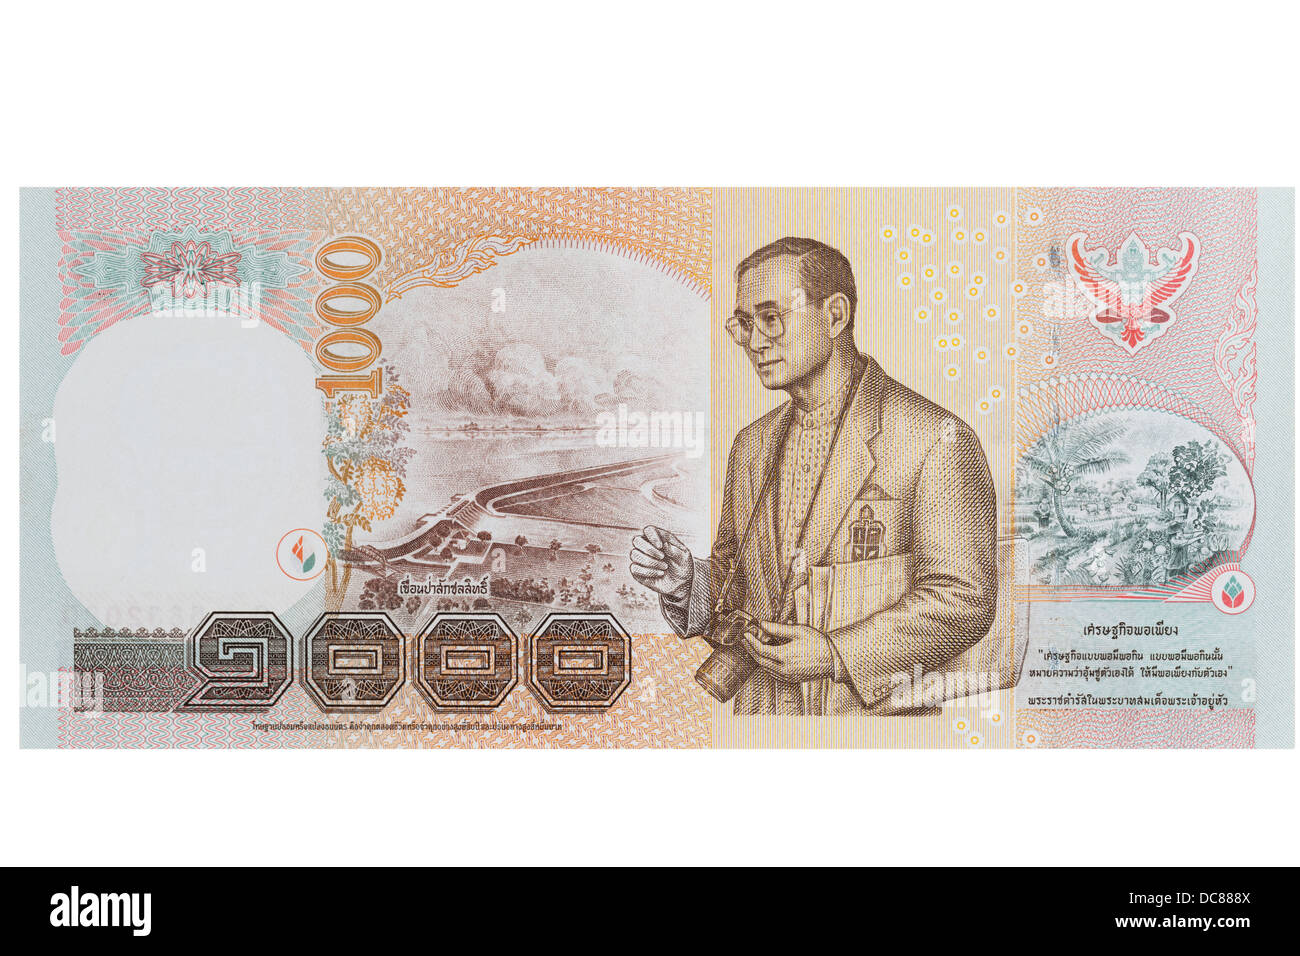 One thousand thai Baht note note on a white background Stock Photo